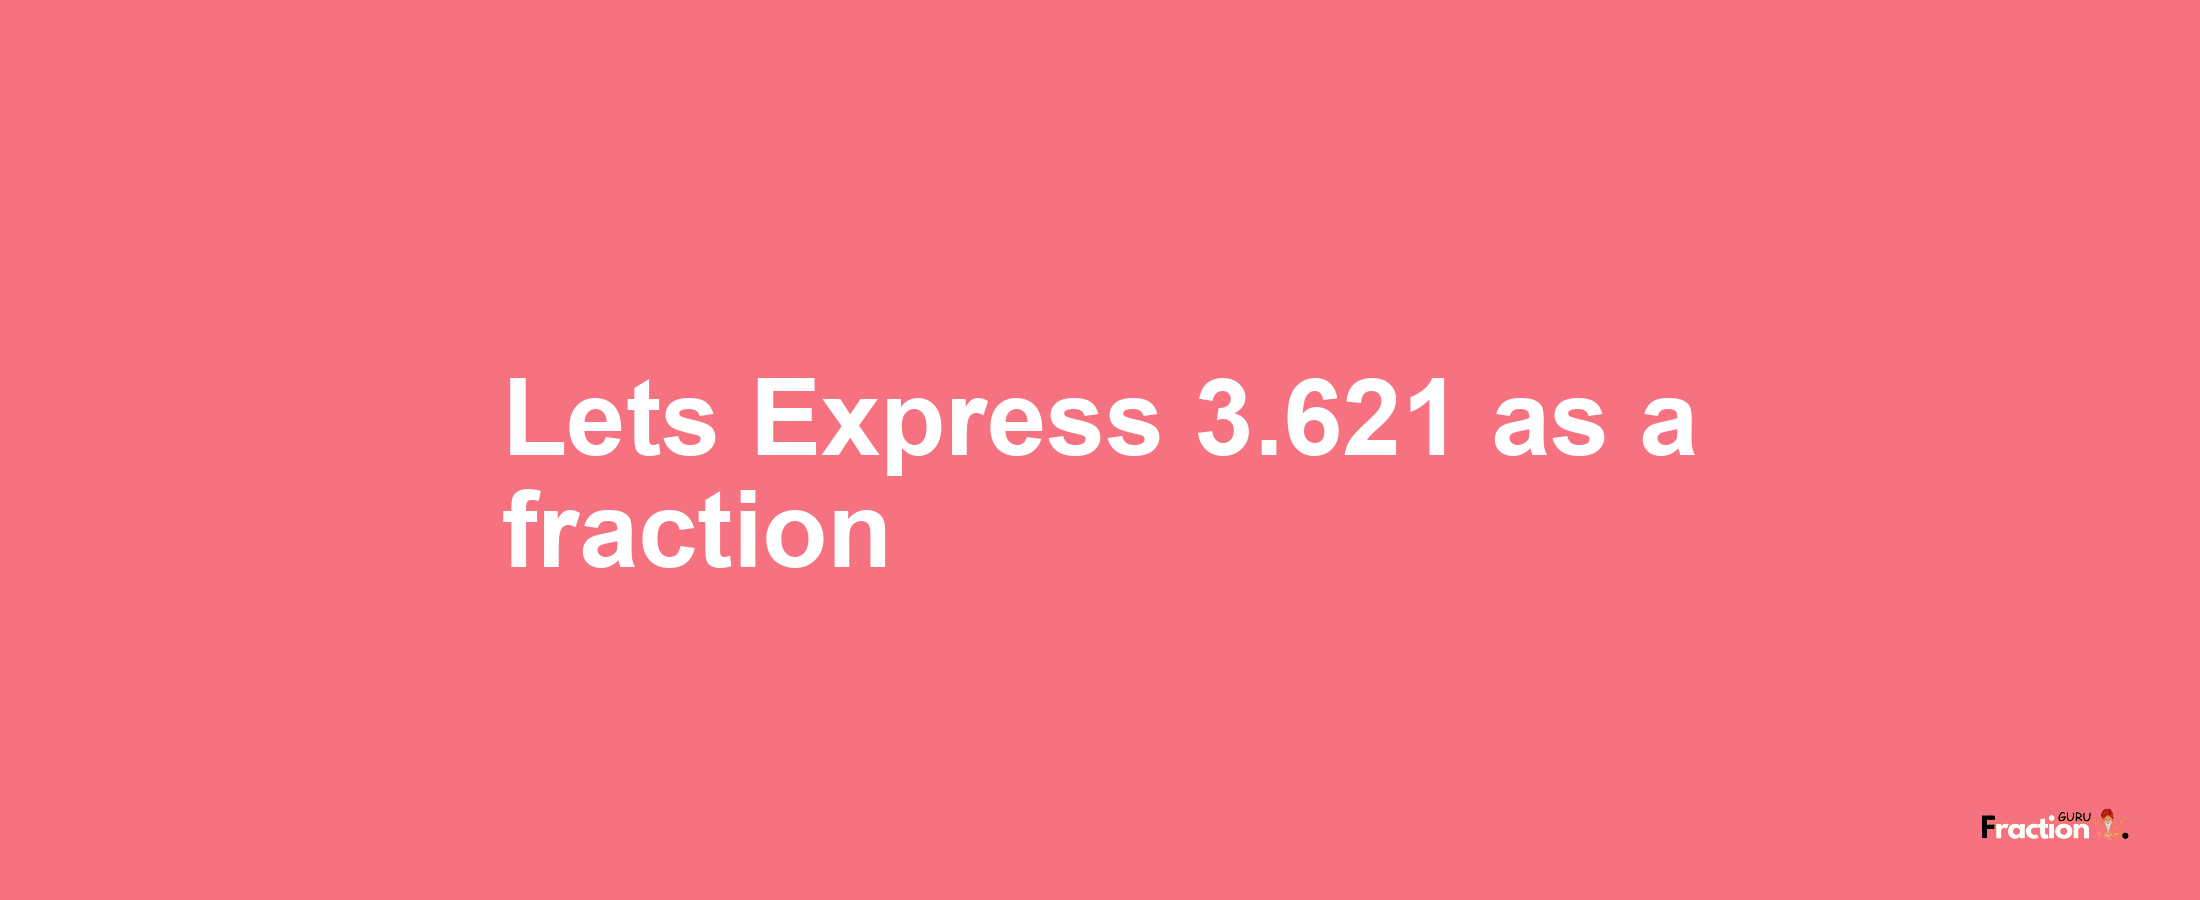 Lets Express 3.621 as afraction